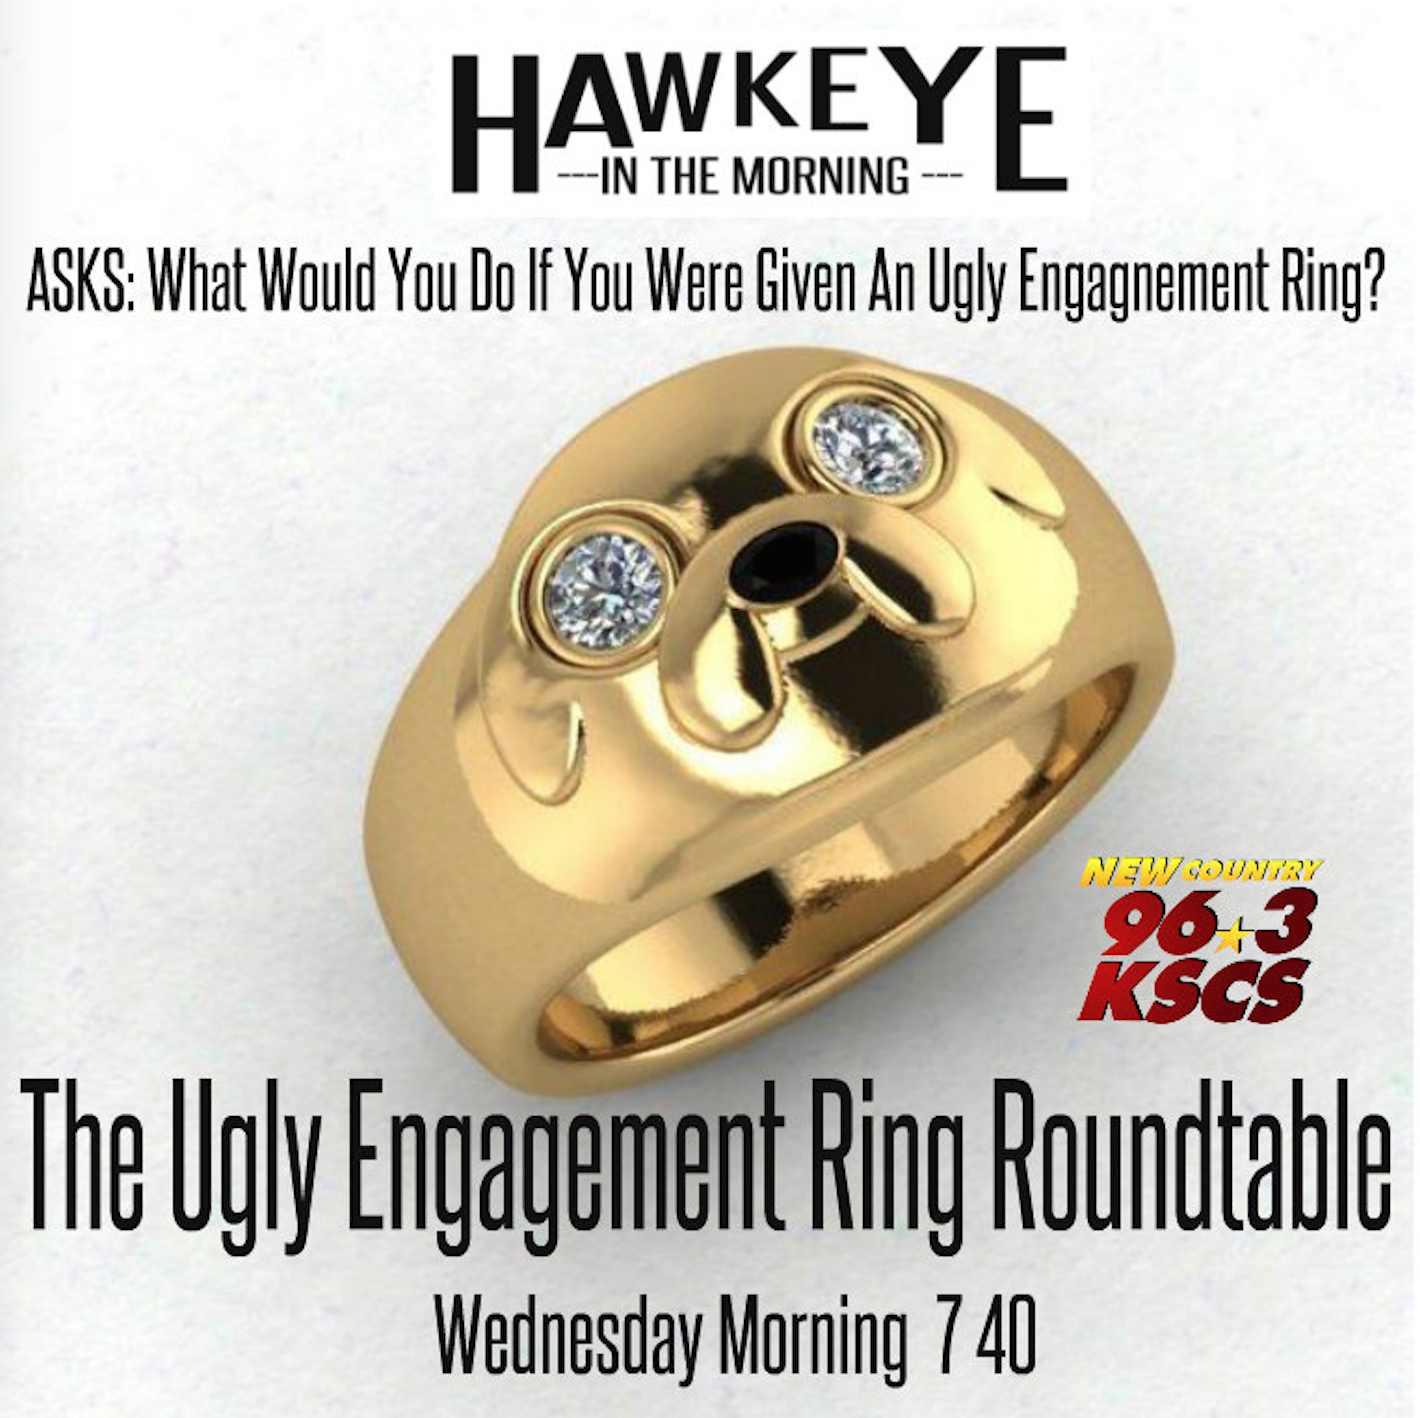 strak troon overloop Hawkeye on Twitter: "We Want To Know: You Boyfriend Gives You the World's Ugliest  Engagement Ring. What would you do? http://t.co/z03bs2VTPn" / Twitter